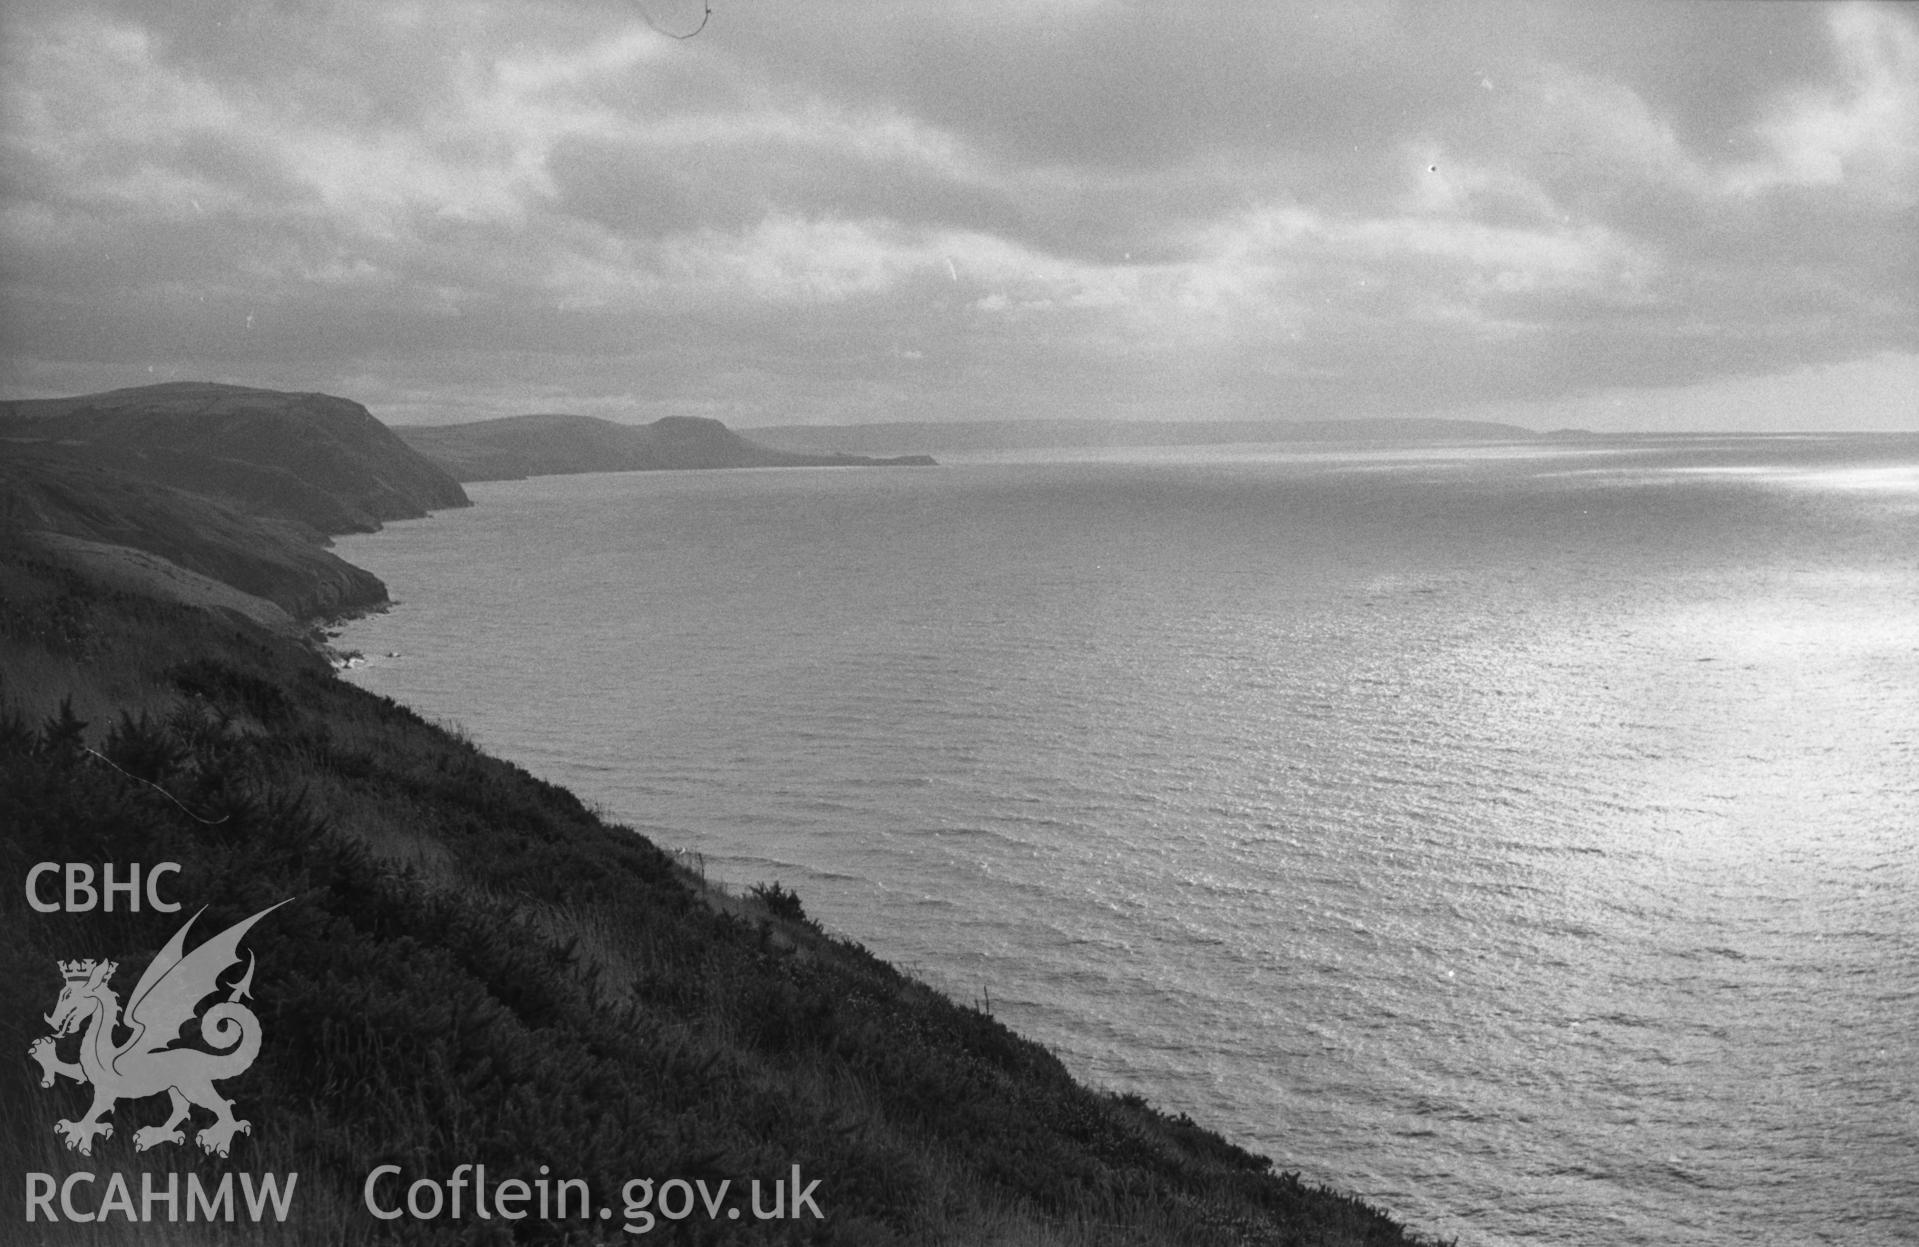 Digital copy of a black and white negative showing view down the coast from Bird's Rock to Penmoelciliau, Pendinas Lochtyn and Cardigan Island. Photographed by Arthur O. Chater in September 1964 from Grid Reference SN 376 600, looking south west.